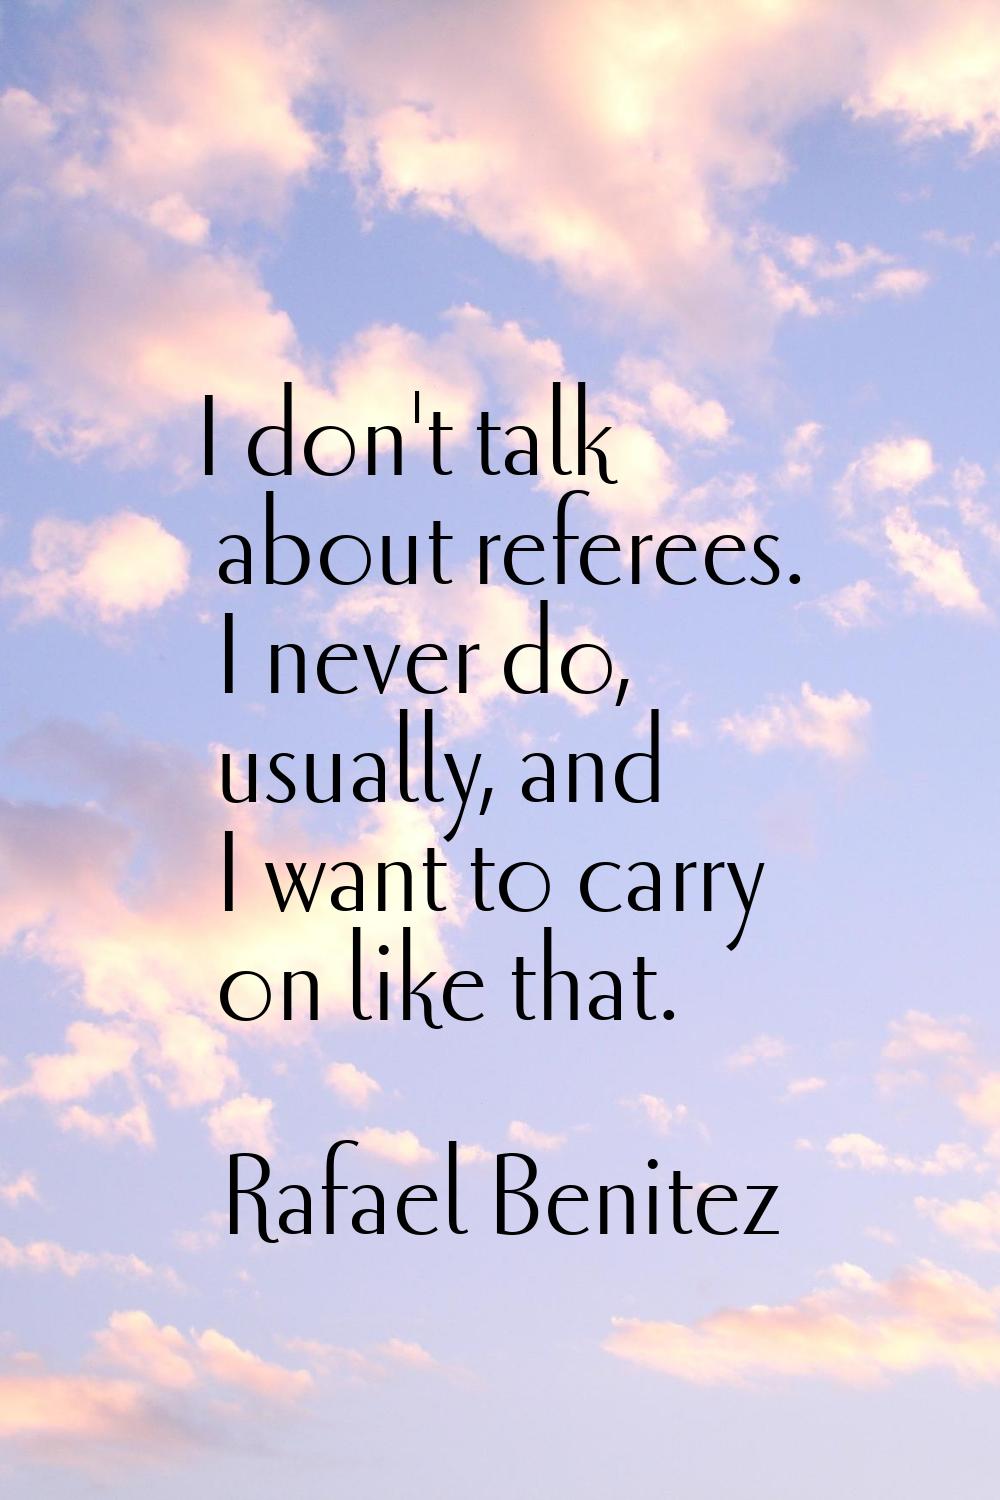 I don't talk about referees. I never do, usually, and I want to carry on like that.